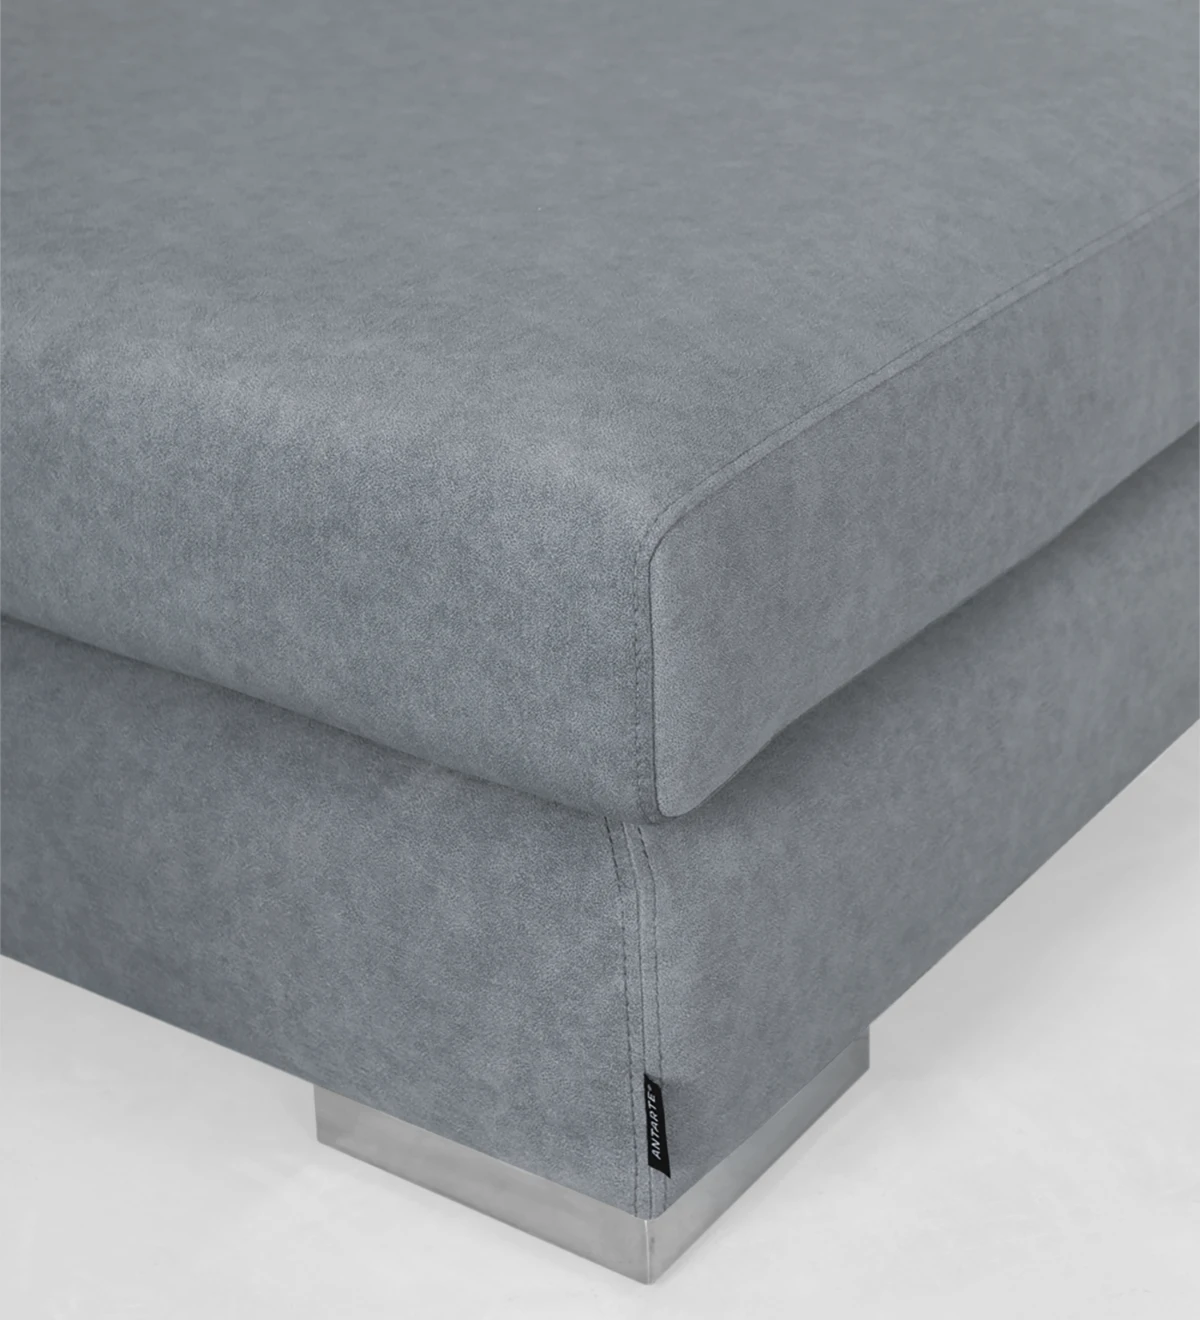 Puff upholstered in fabric.